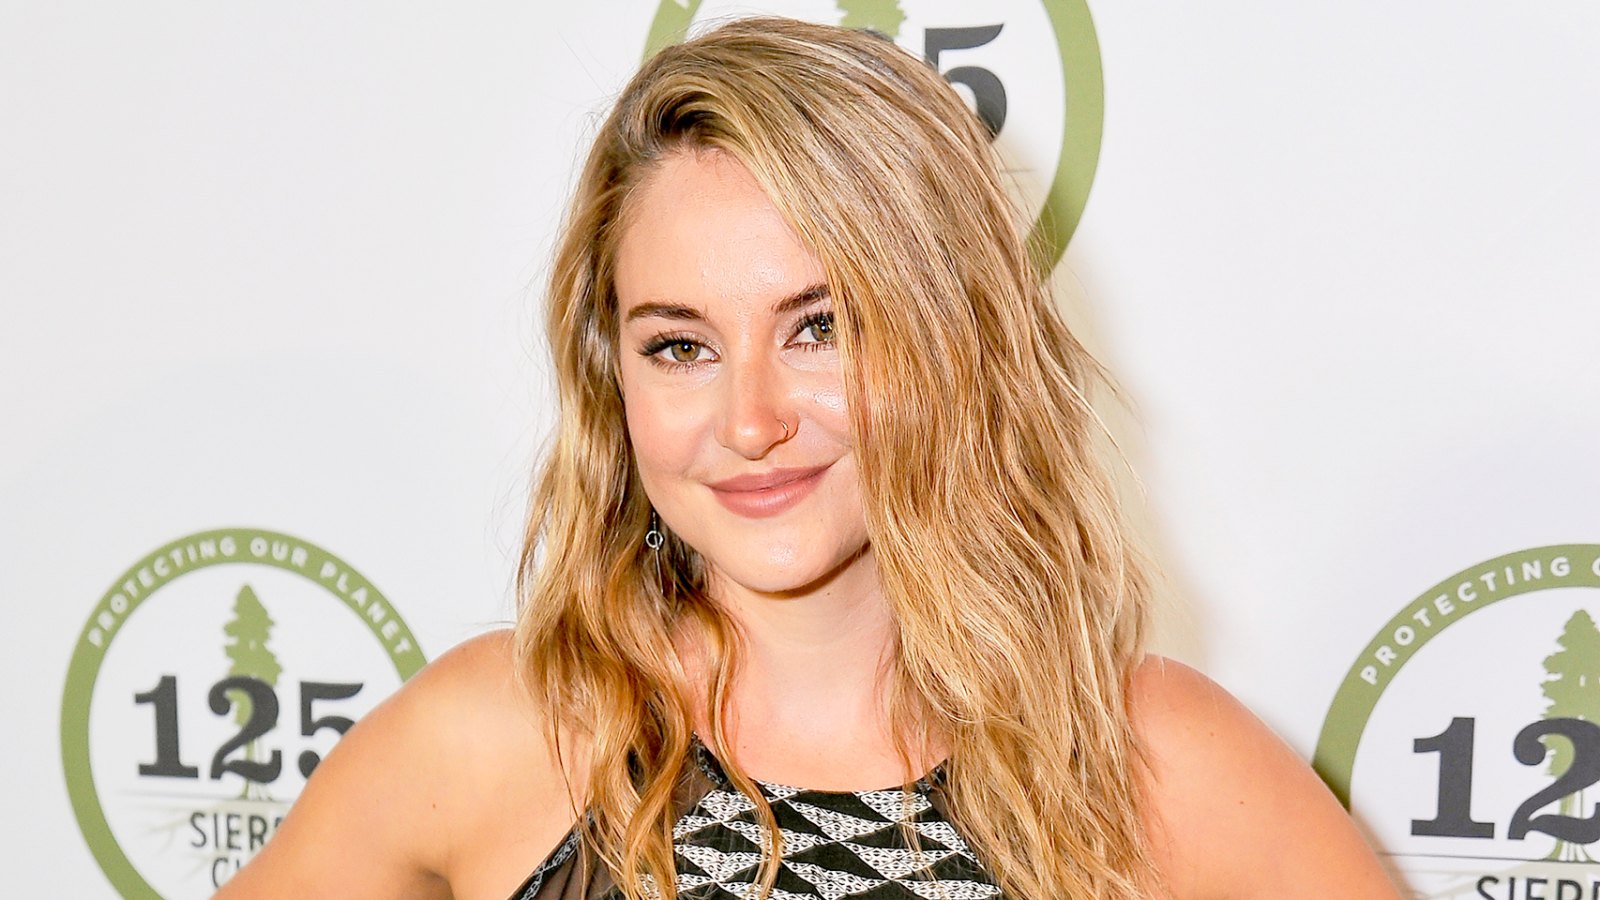 Shailene Woodley attends Sierra Club's 125th Anniversary Trail Blazers Ball at the Palace of Fine Arts on May 18, 2017 in San Francisco, California.